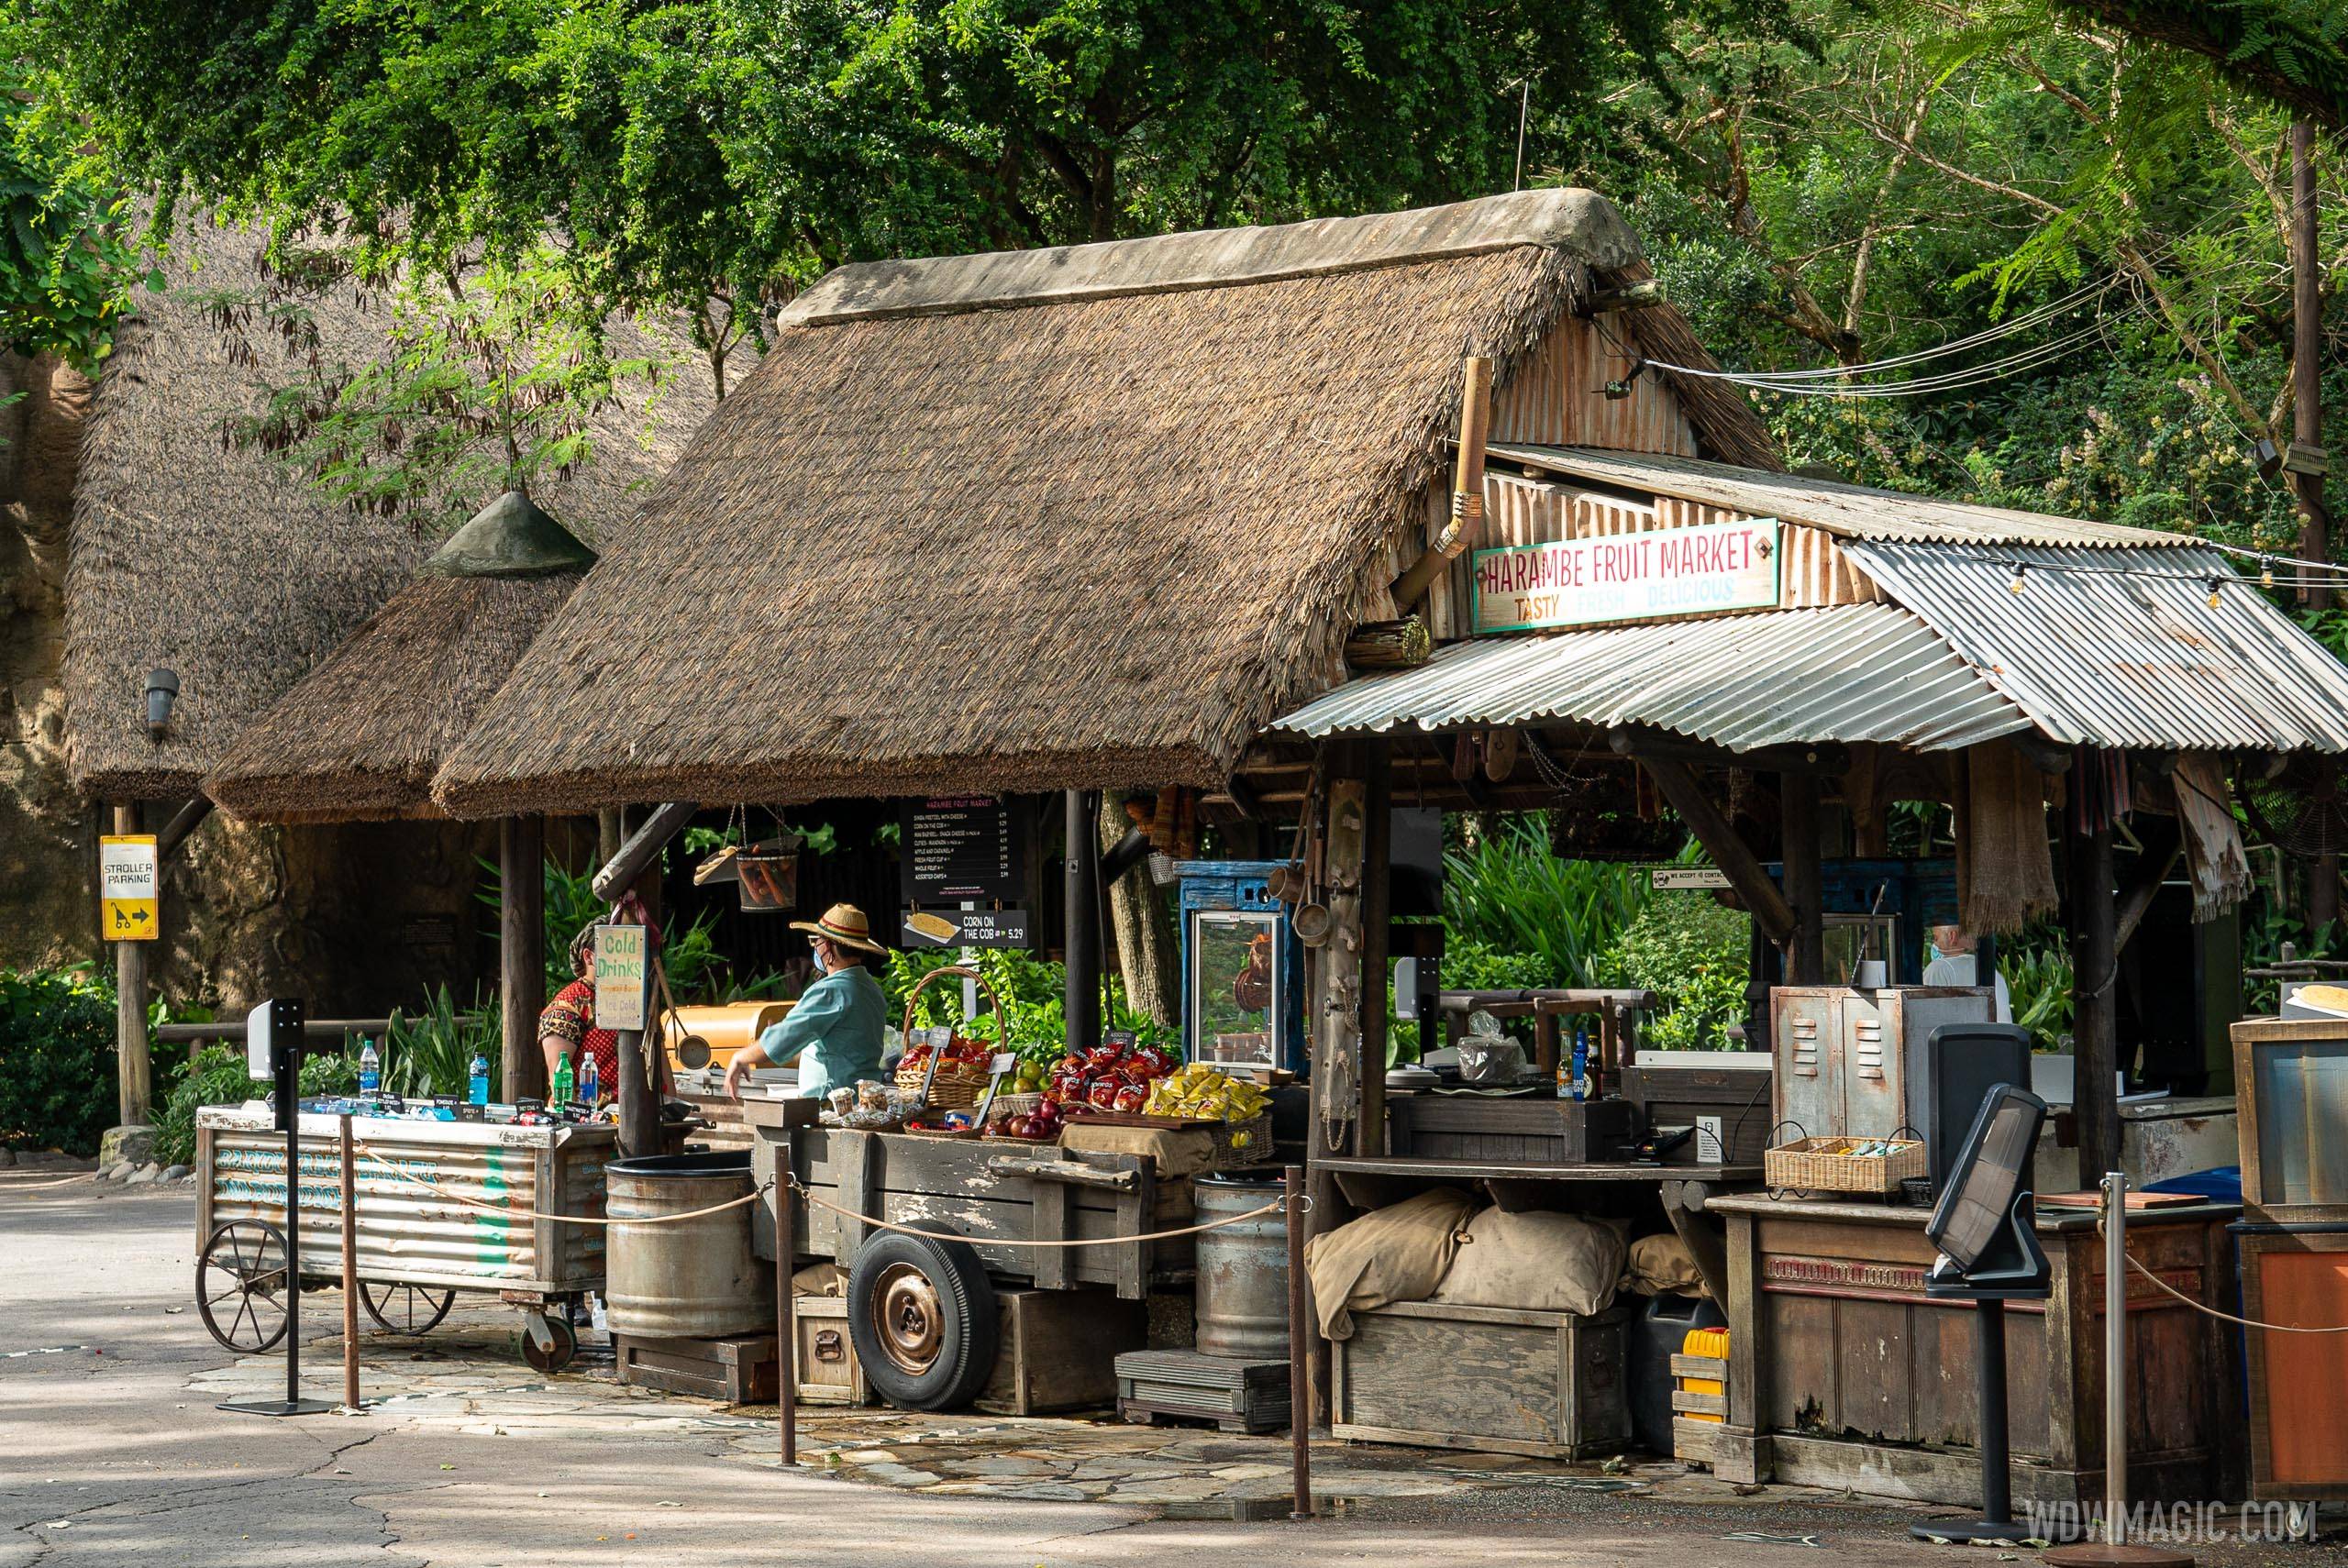 Harambe Fruit Market overview